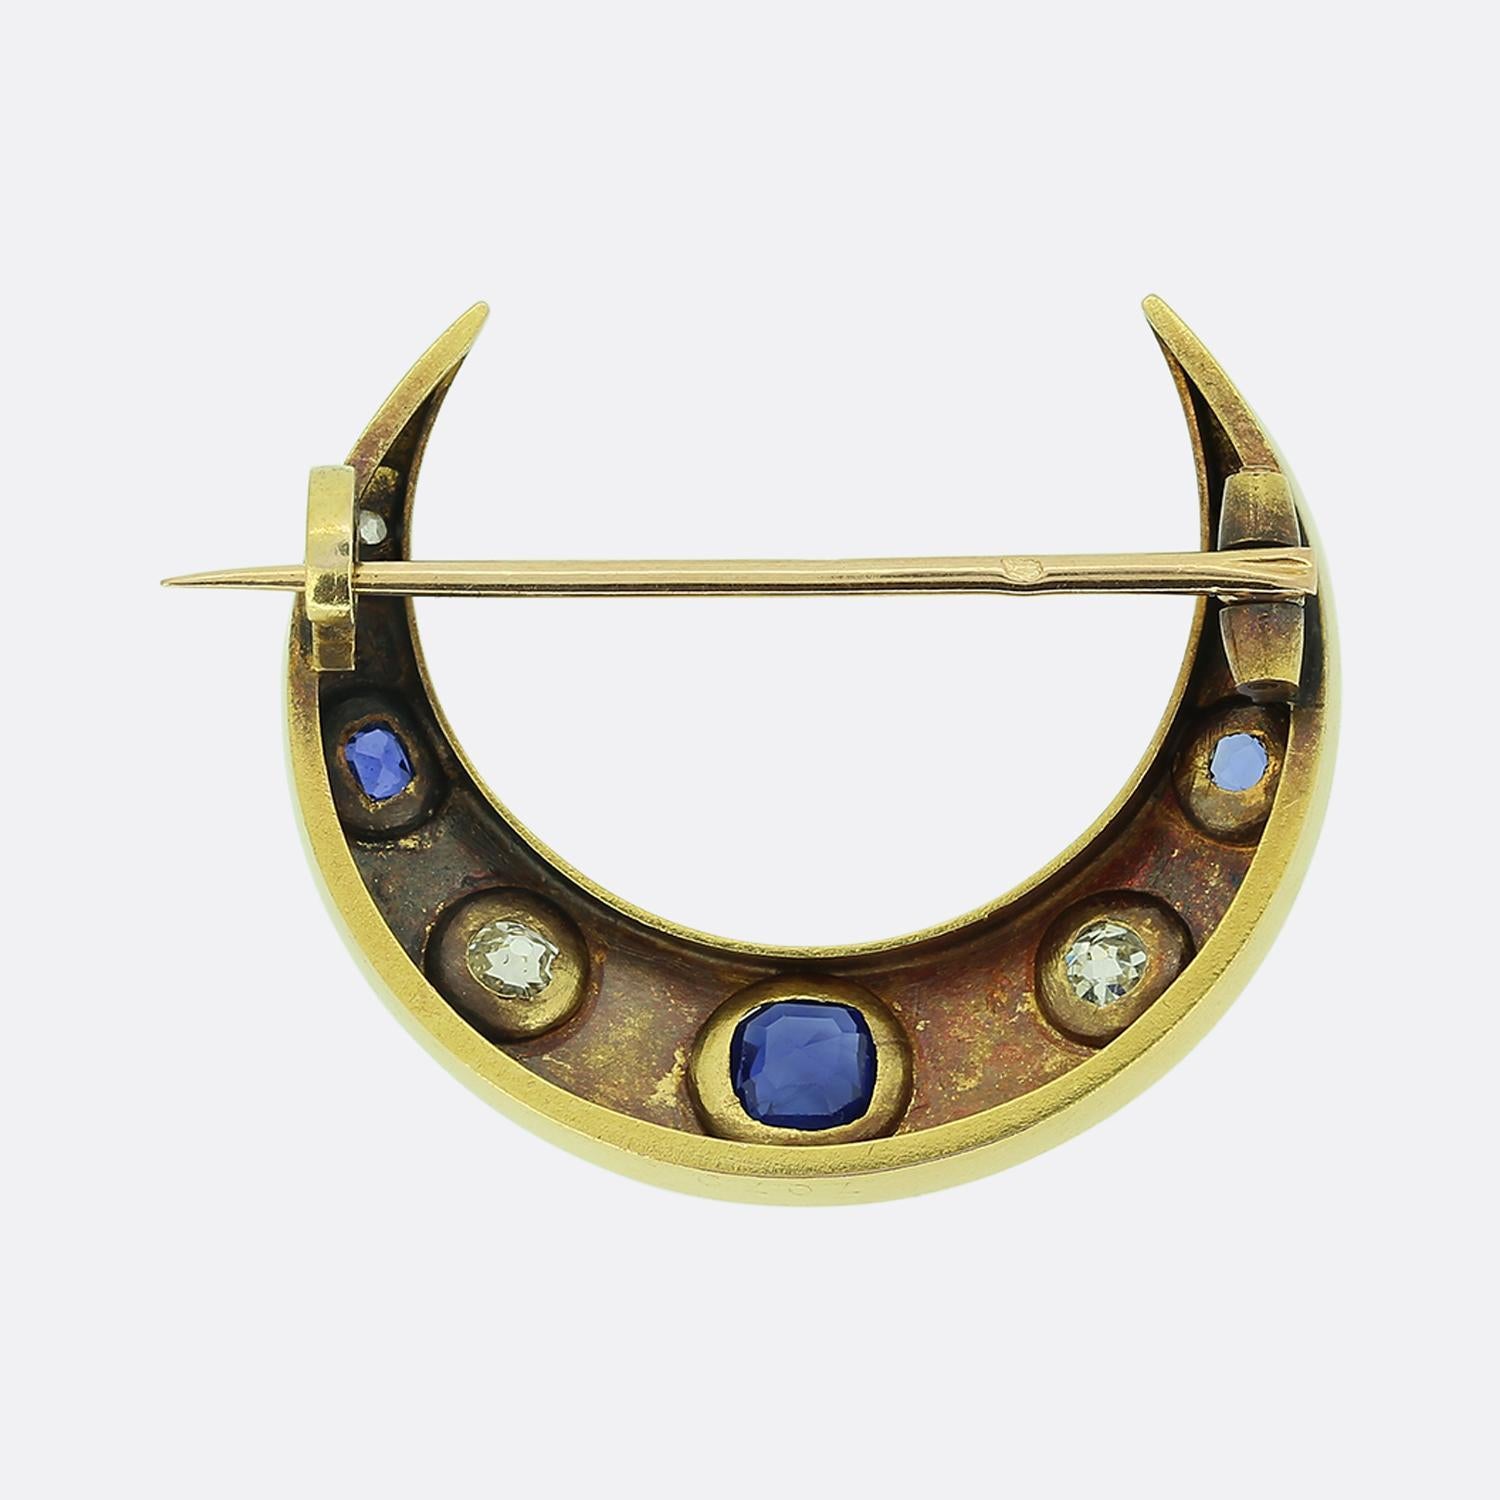 Here we have a delightful sapphire and diamond set brooch from the later stages of the 19th century. This gorgeous piece has been crafted from a rich 18ct yellow gold into the shape of a crescent moon which plays host to an alternating array of